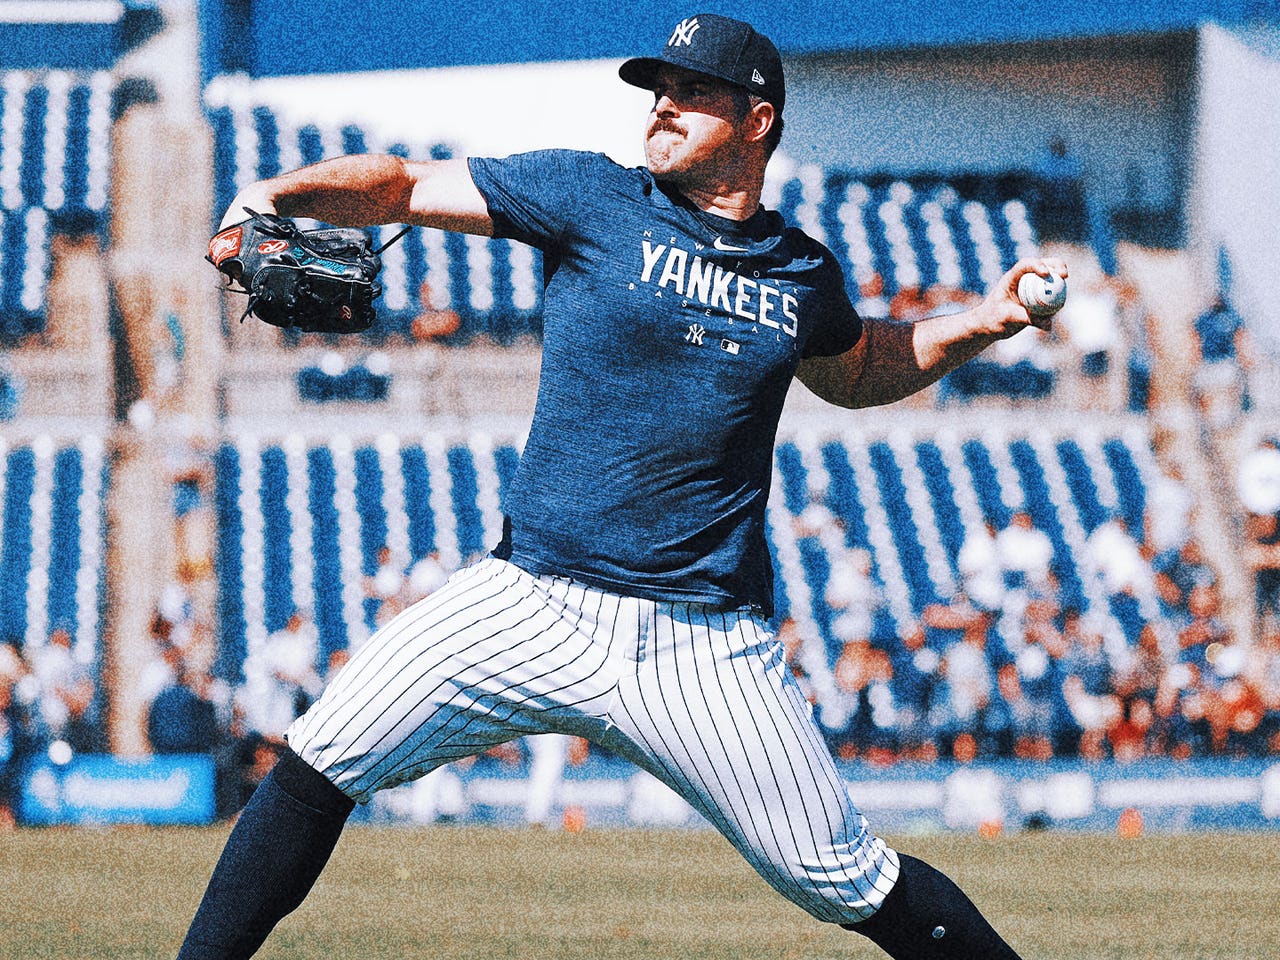 Yankees reliever Trivino warms up in wrong jersey, changes – KLBK